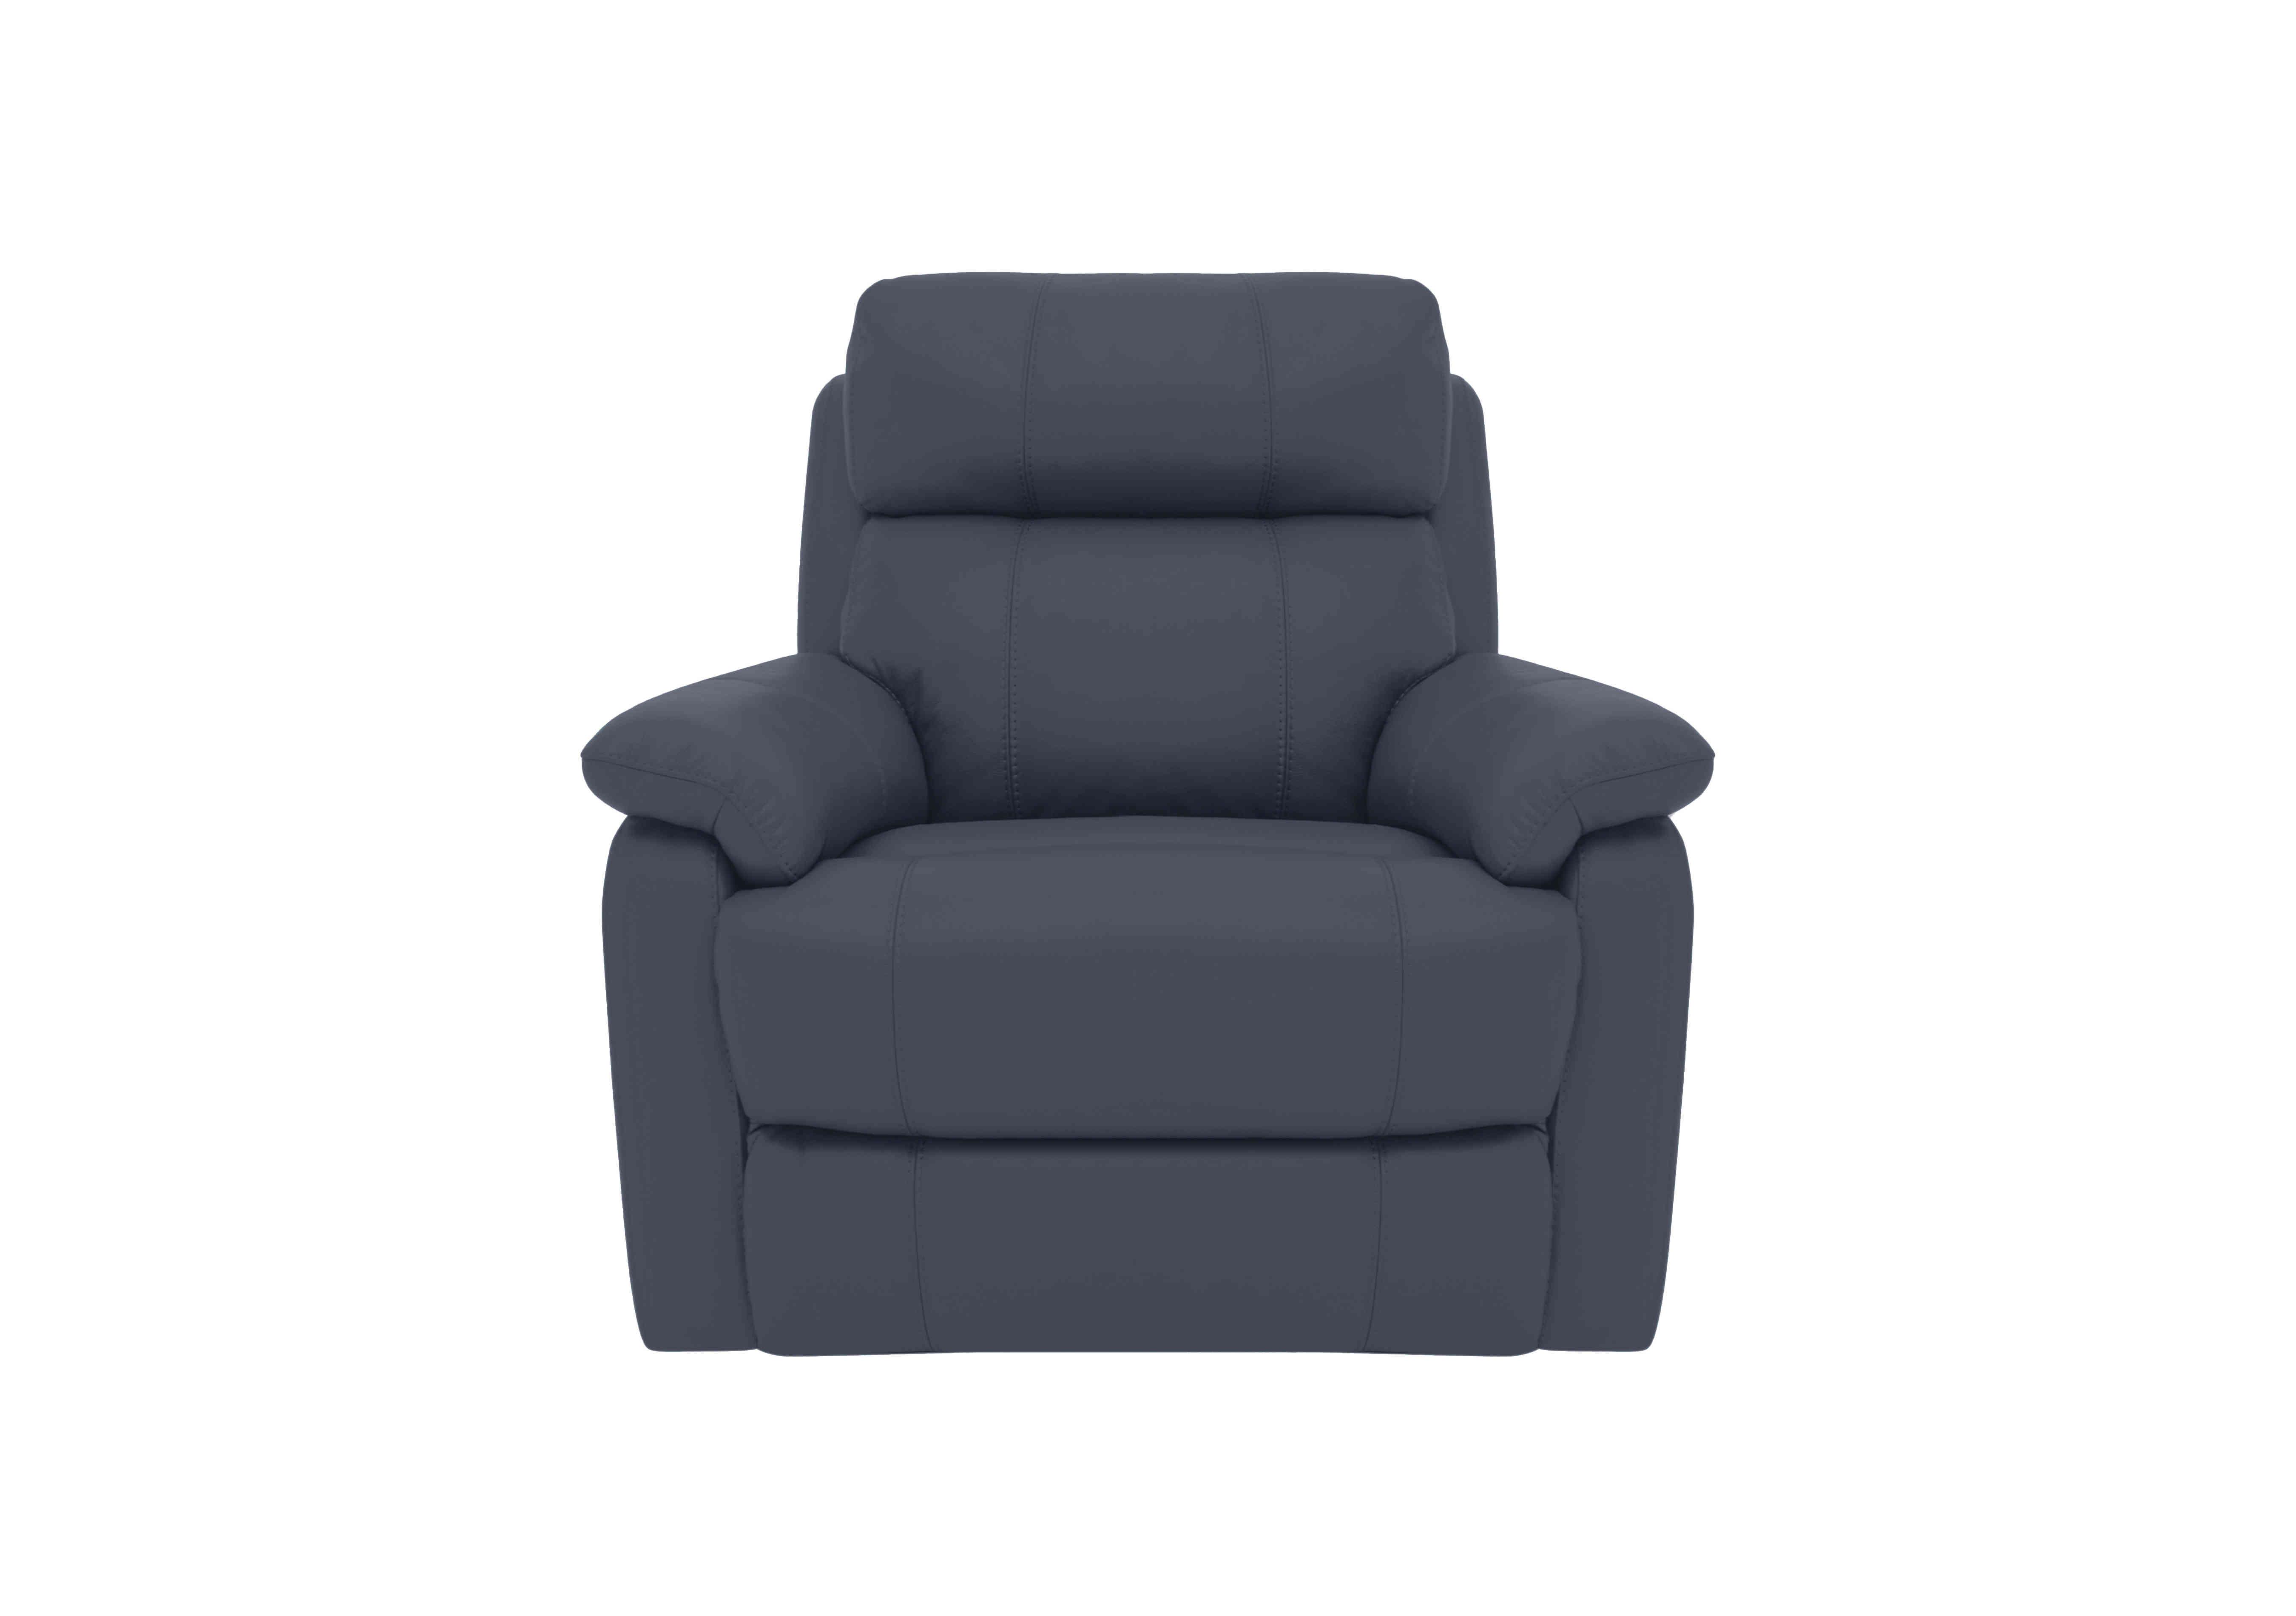 Relax Station Komodo Leather Power Armchair in Bv-313e Ocean Blue on Furniture Village